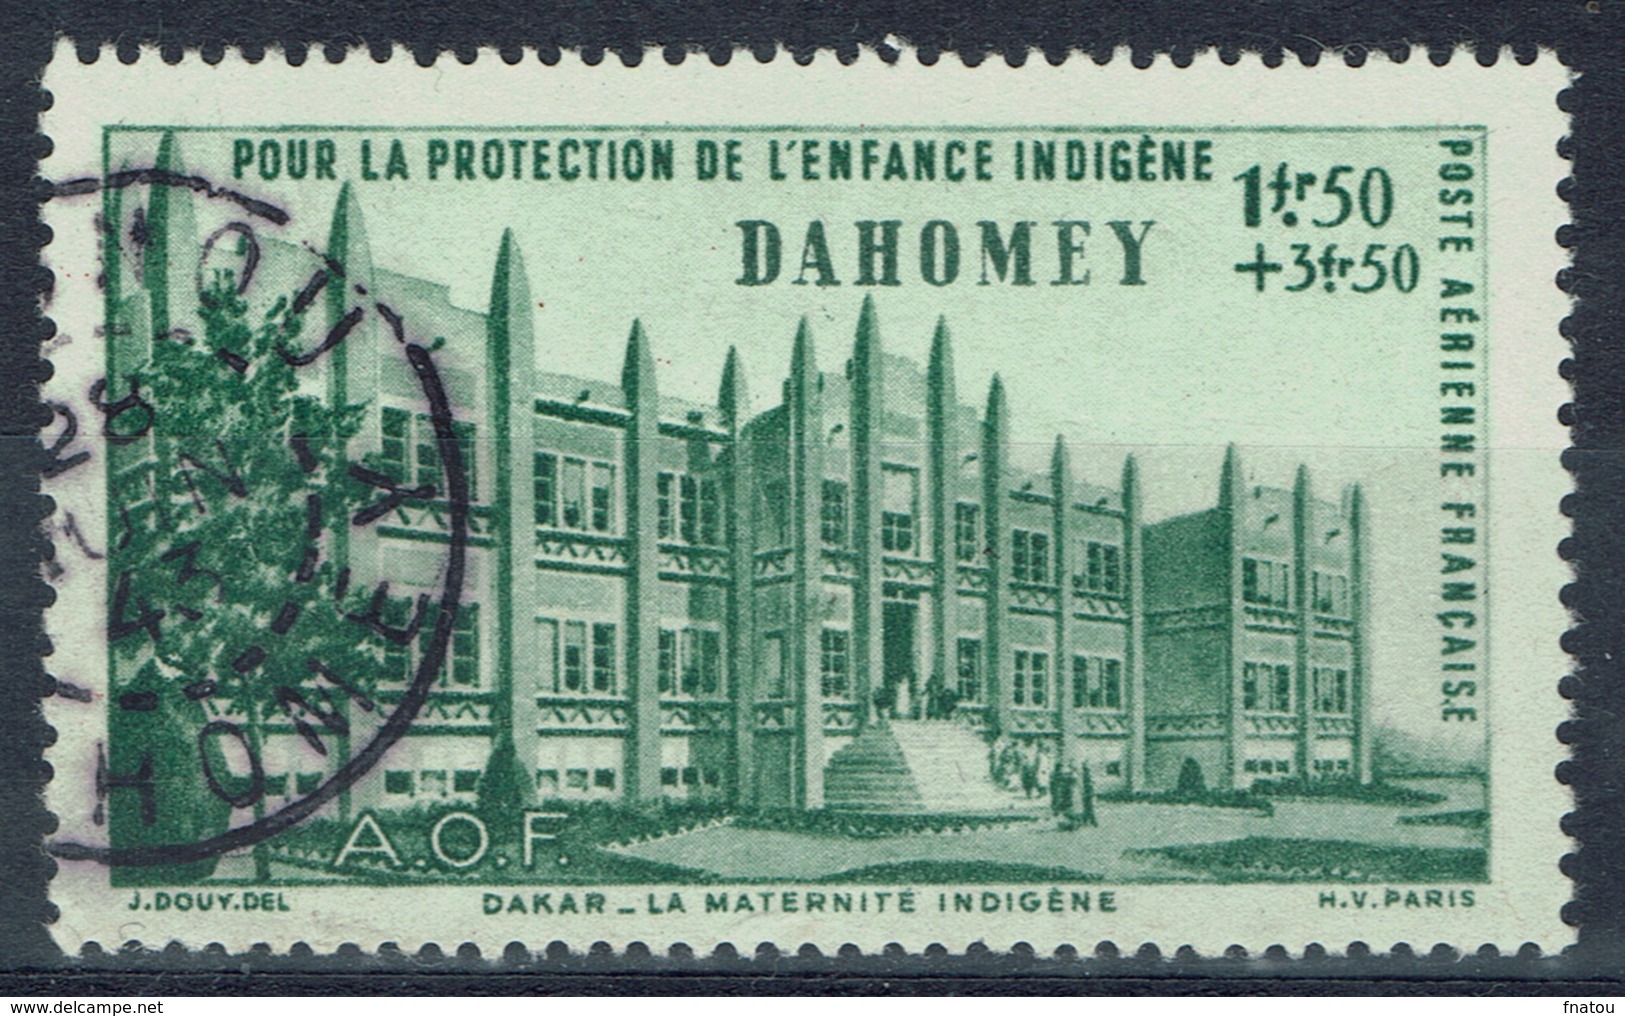 Dahomey (French Colony, Now Benin), 1f.50+3f.50., Childhood Welfare, 1942, VFU Airmail - Used Stamps